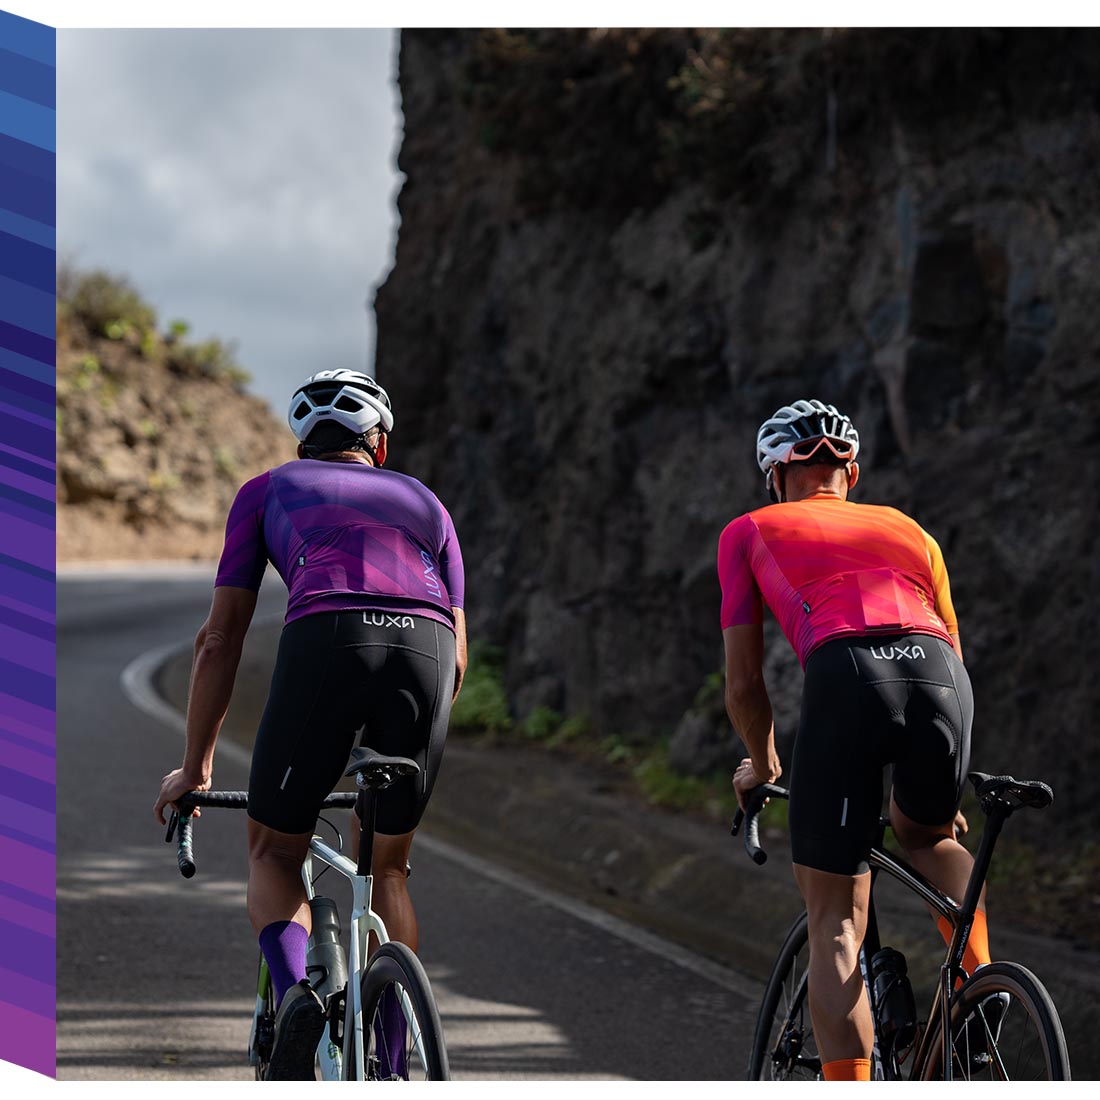 Two male cyclists in Luxa cycling outfits - one in a purple jersey and shorts, the other in an orange jersey and shorts. One of the cyclists is wearing orange socks to match the color of his jersey.